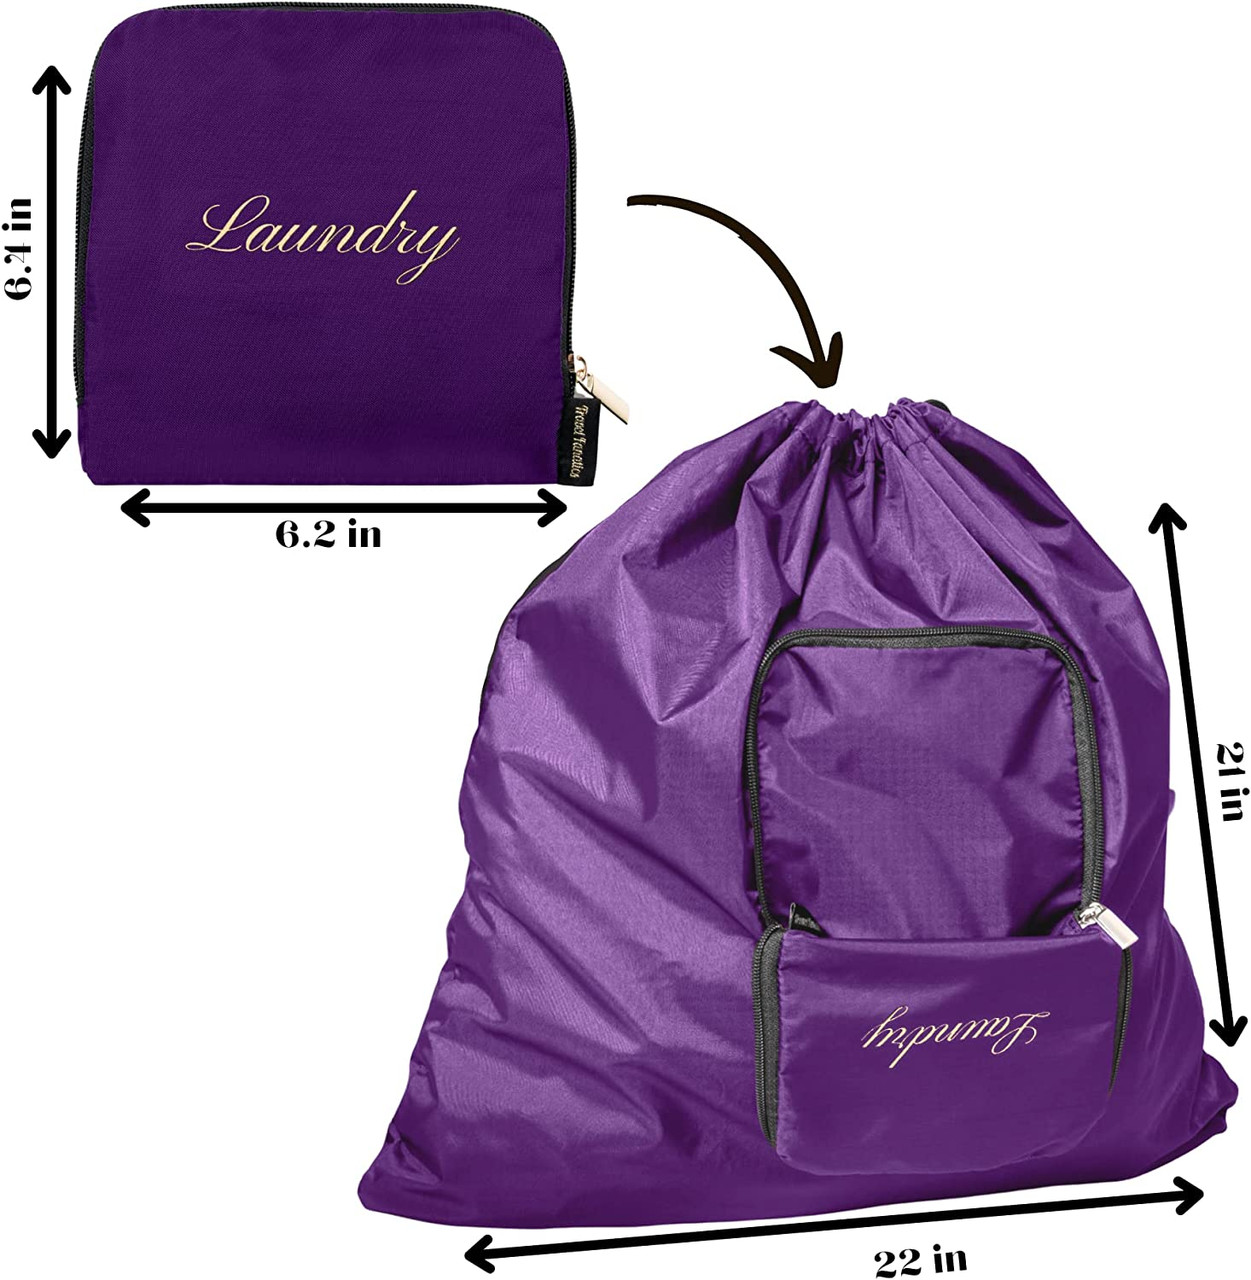 Large Laundry Bag with Drawstring and Locking Closure - Color: Purple,Size: 30x40